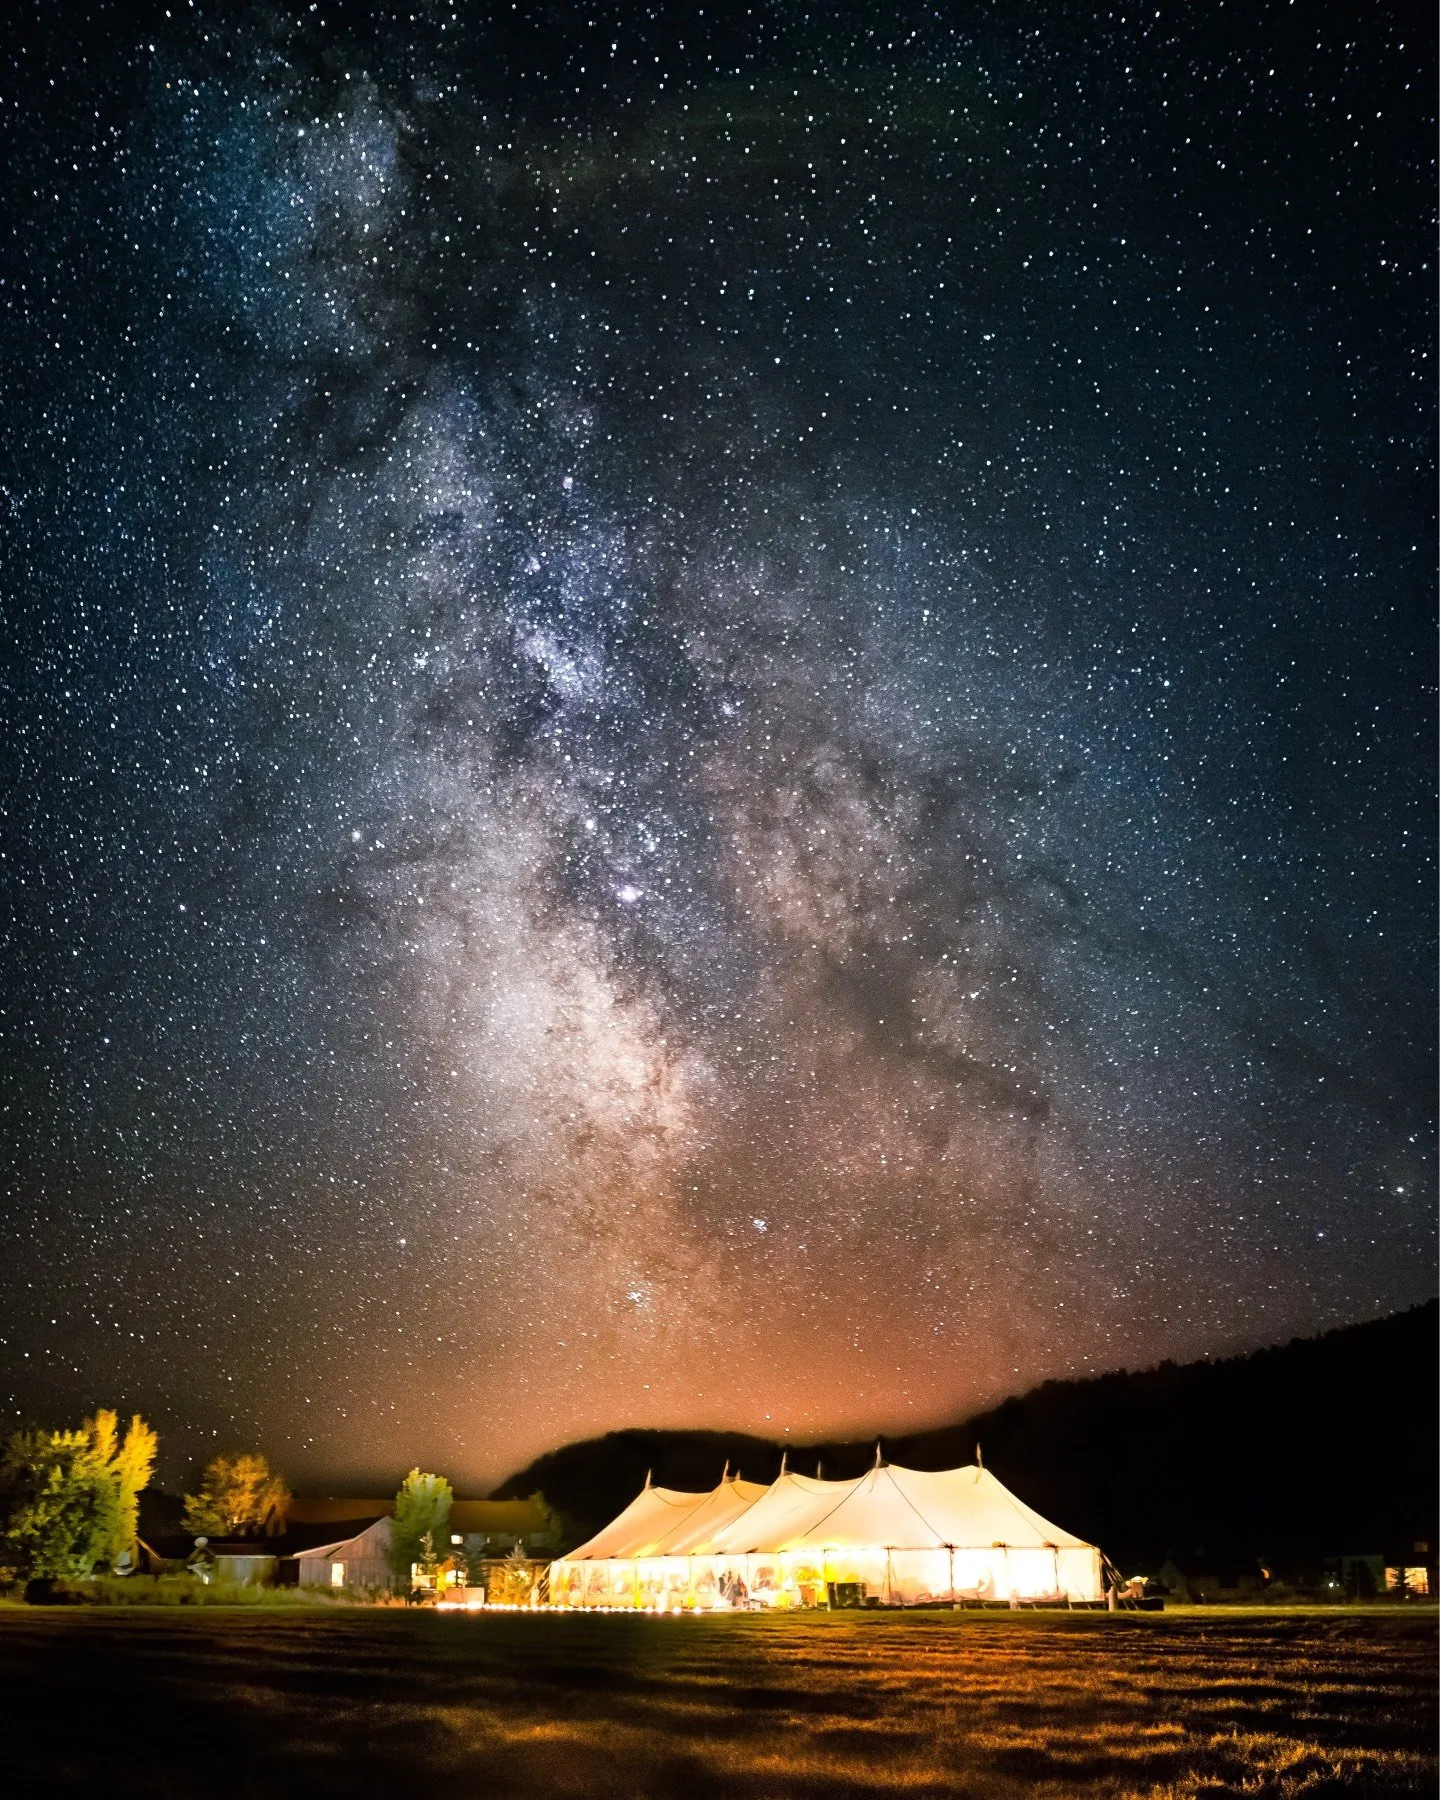 A starry night sky with a large lit up tent